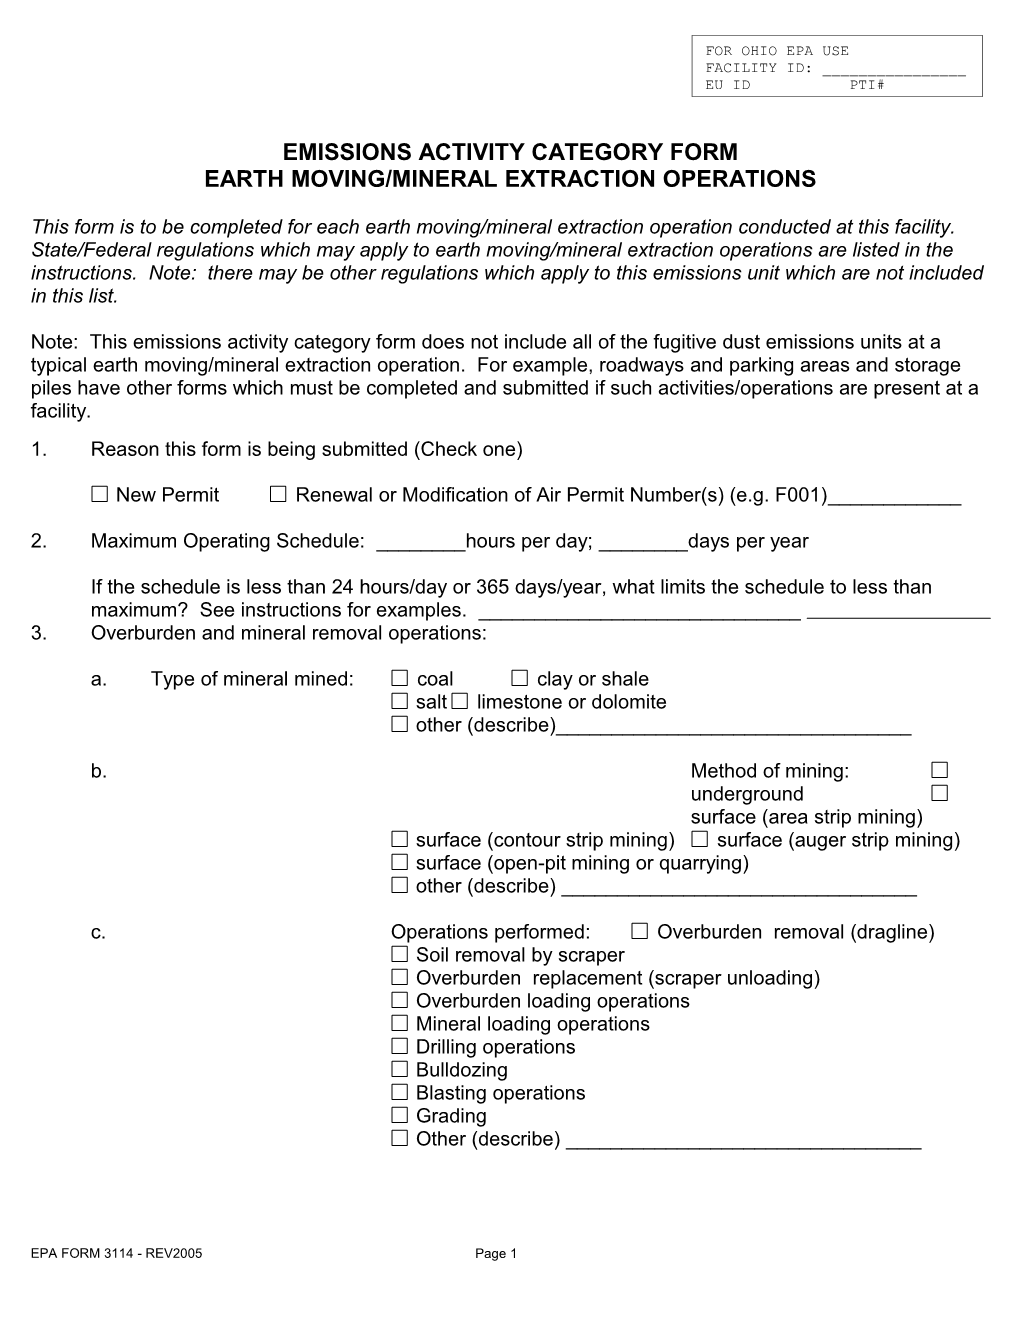 Emissions Activity Category Form s2